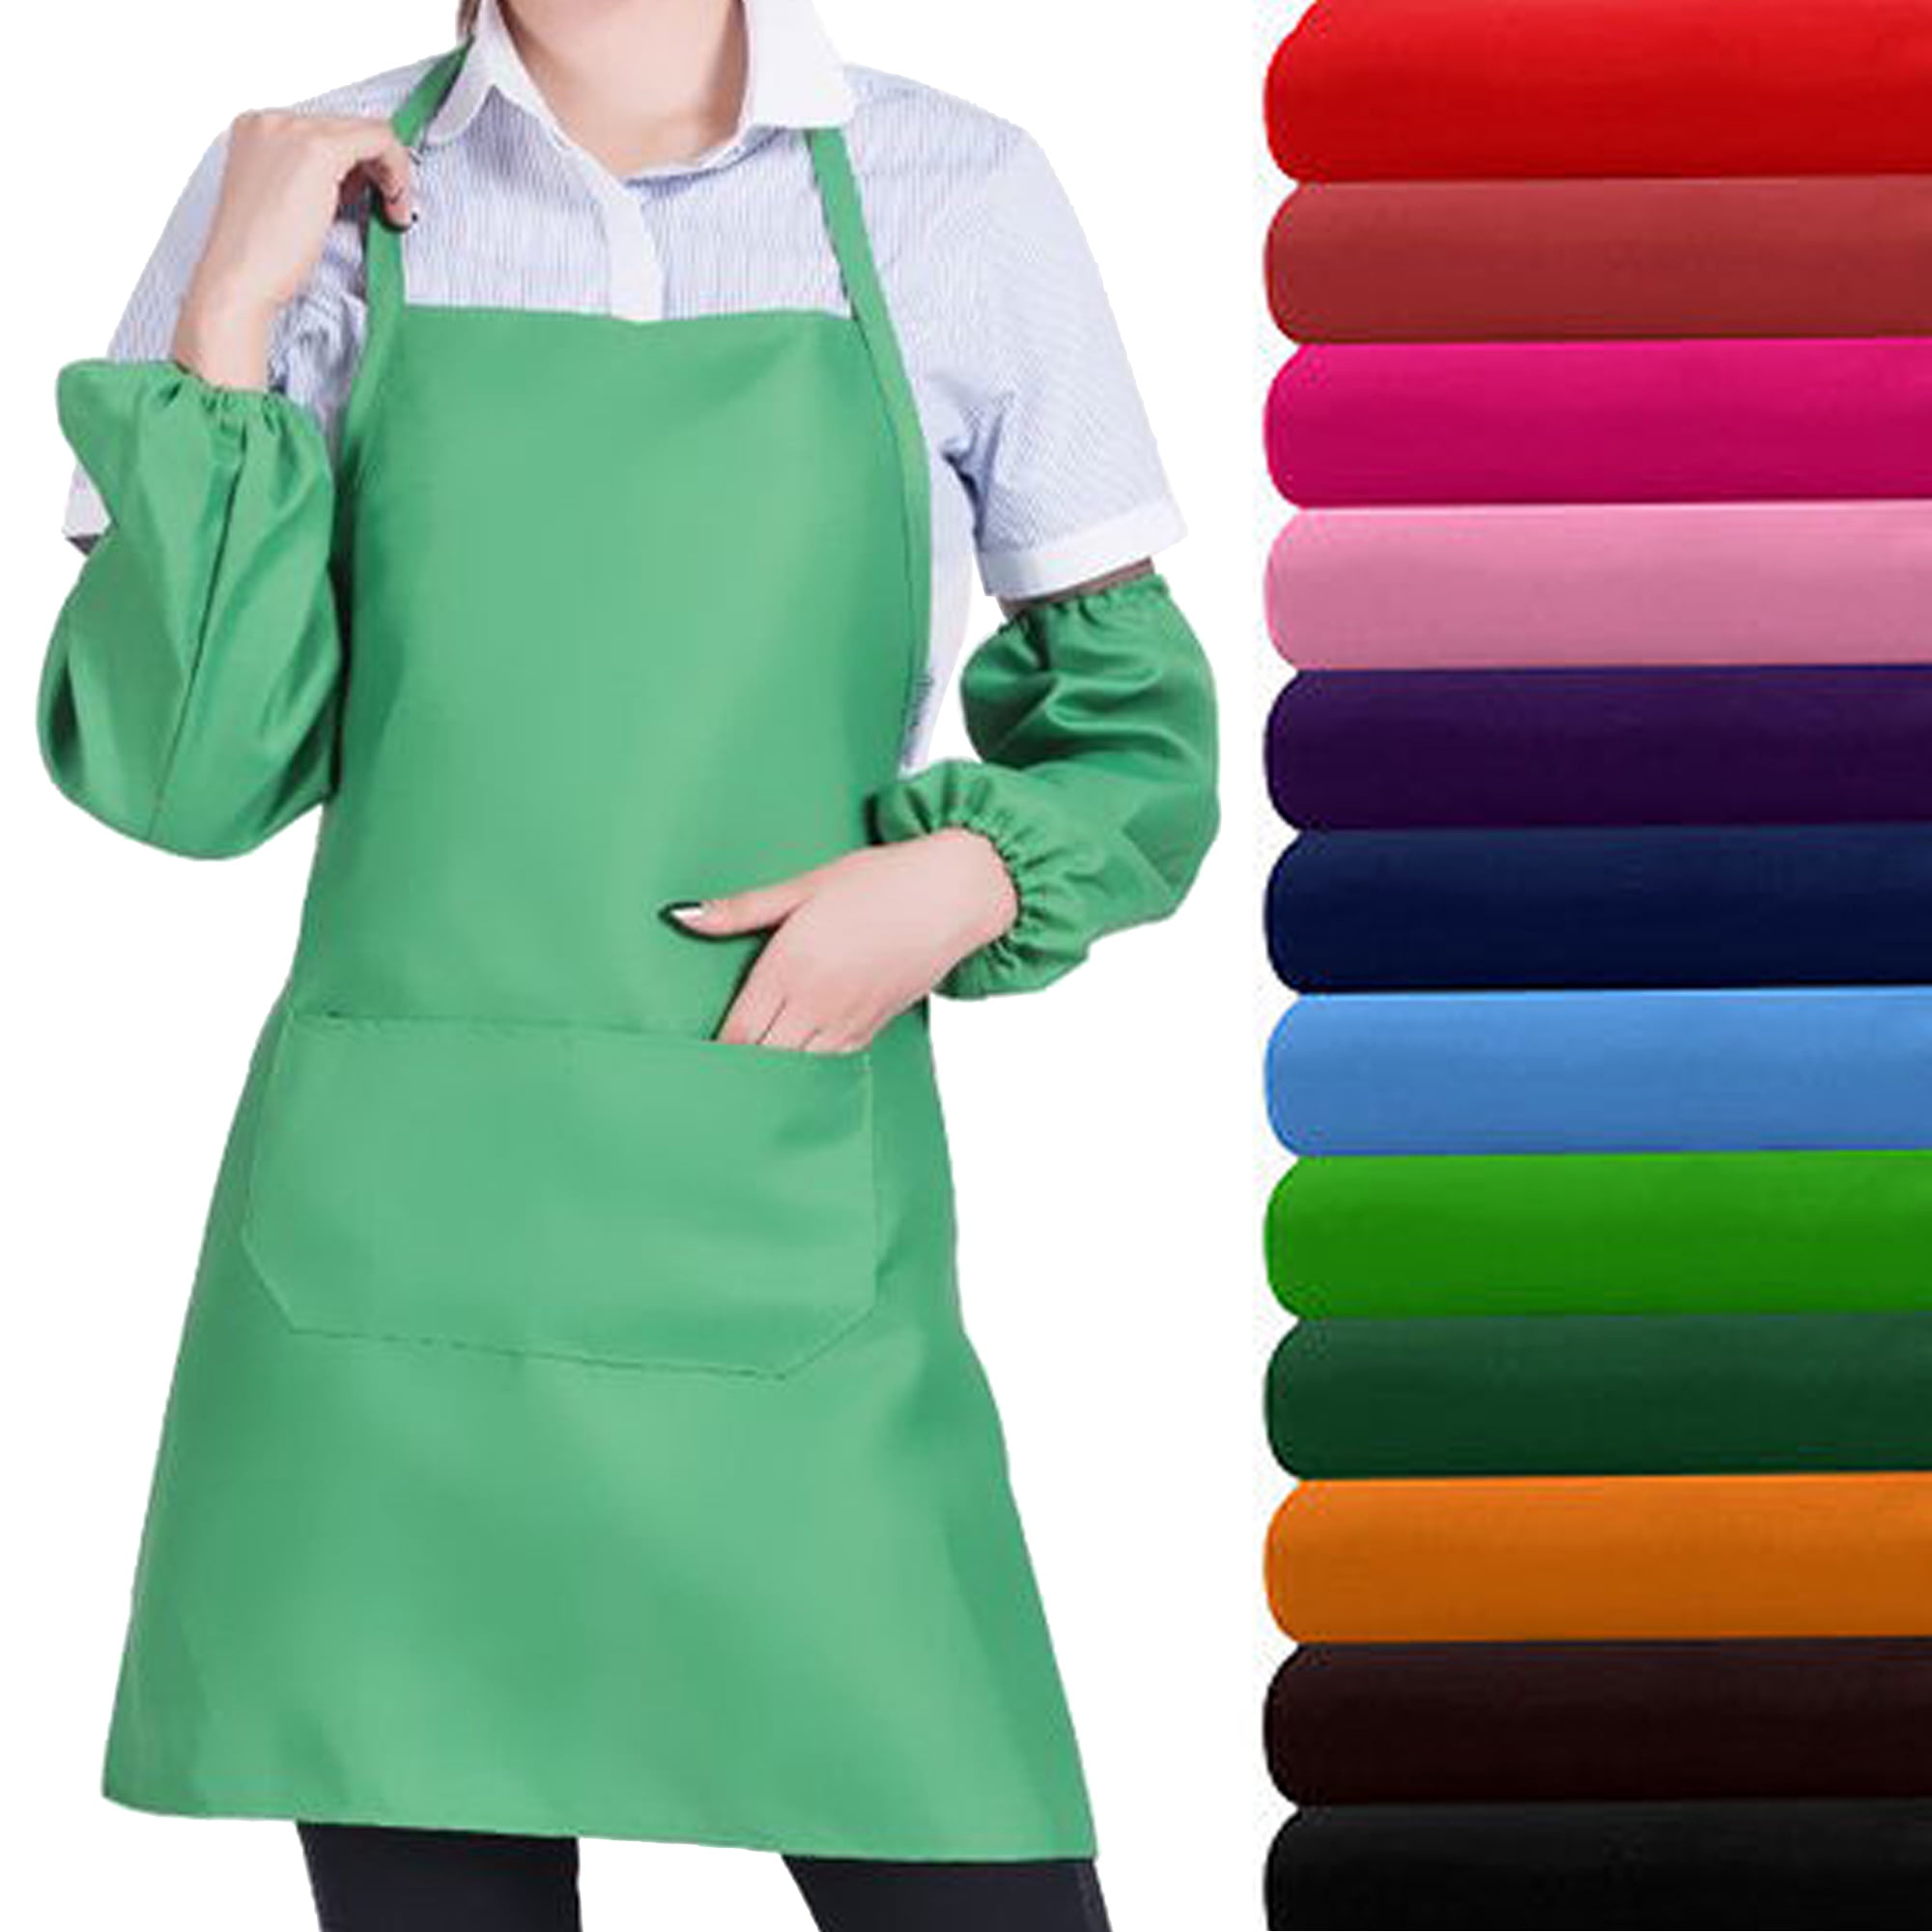 Kitchen Accessories Colorful Design Cooking Kitchen Aprons For Women Men Chef Apron Stain Resistant Bib Apron With Pocket 